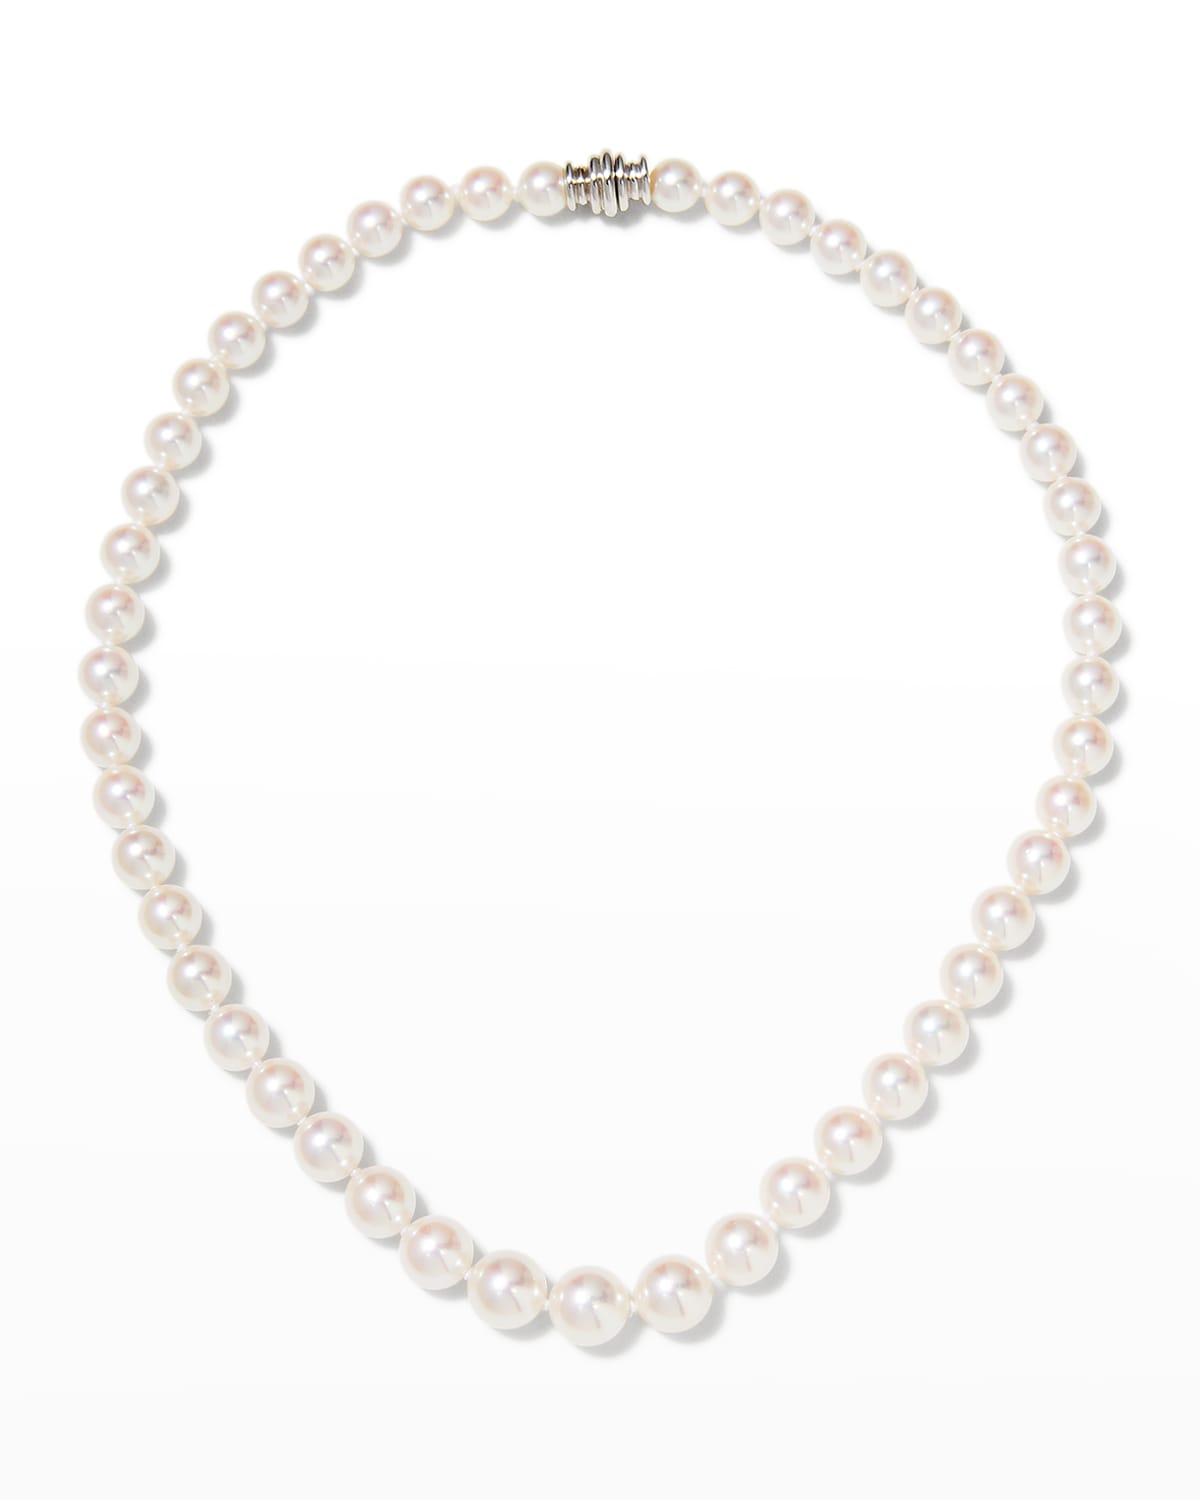 Assael 16" Akoya Cultured Graduated 6.5-9.5mm Pearl Necklace with White Gold Clasp